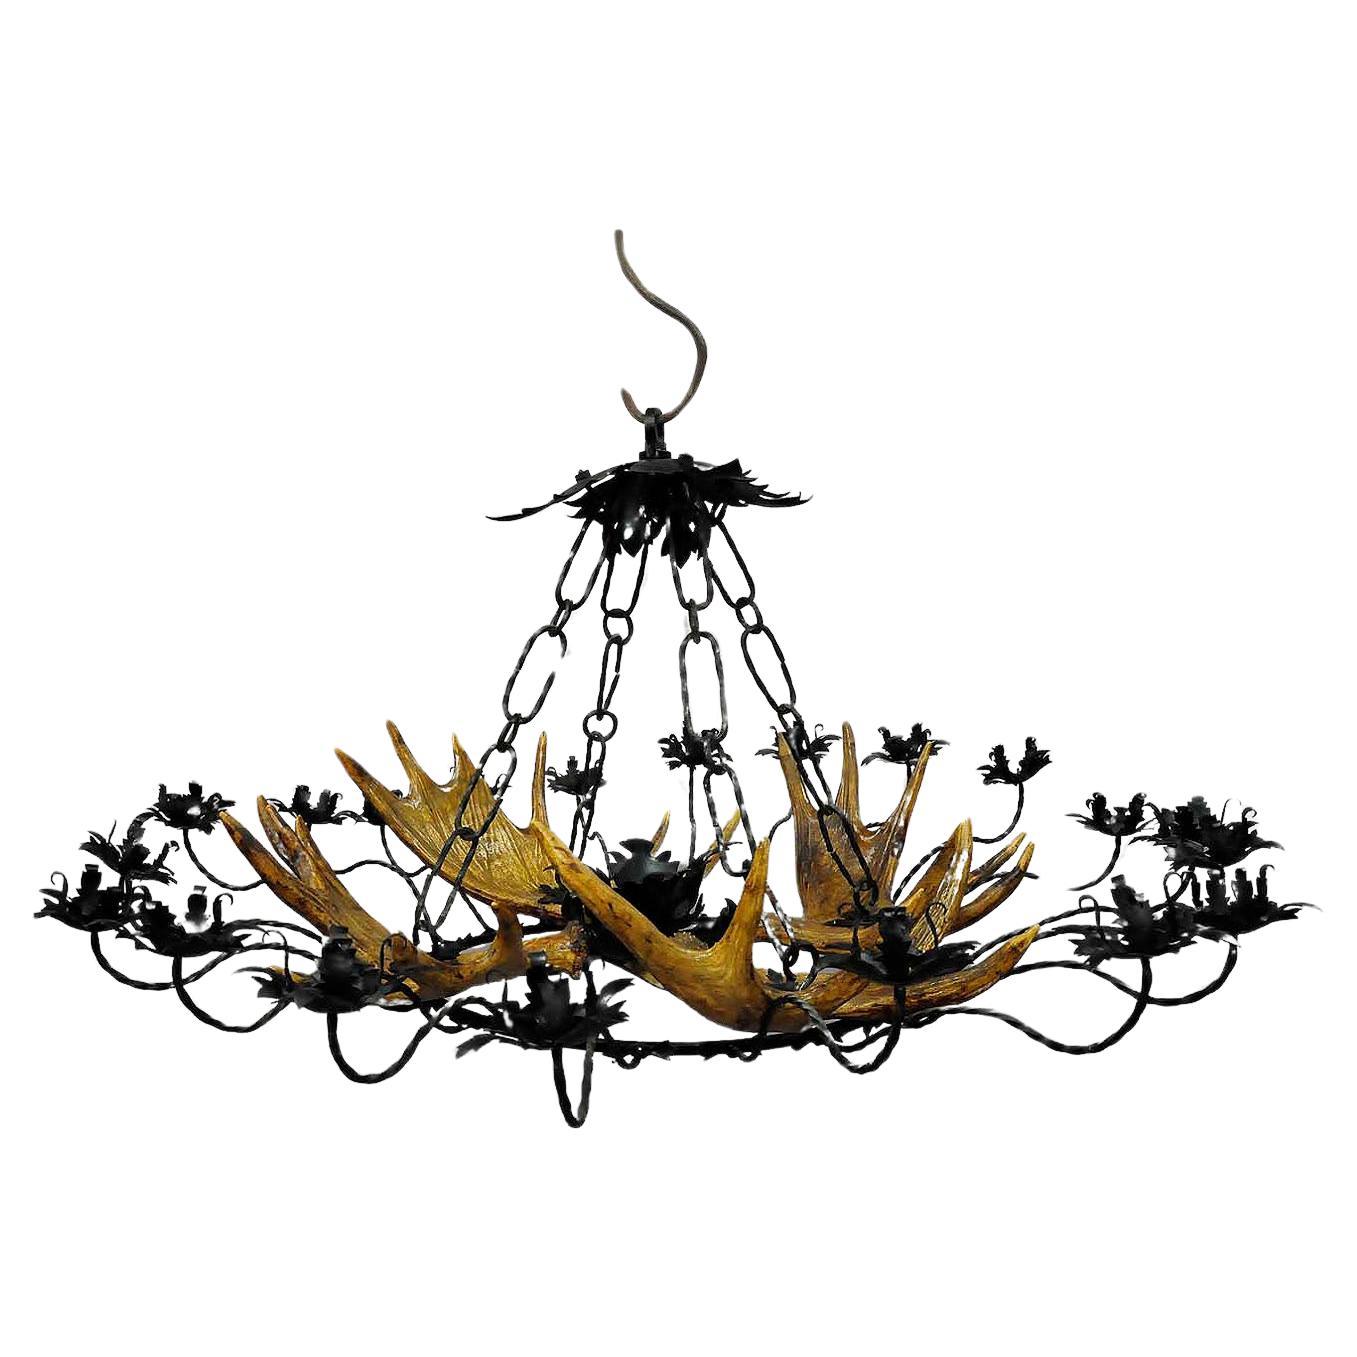 Vintage Antler Chandelier with Forged Iron Suspension For Sale